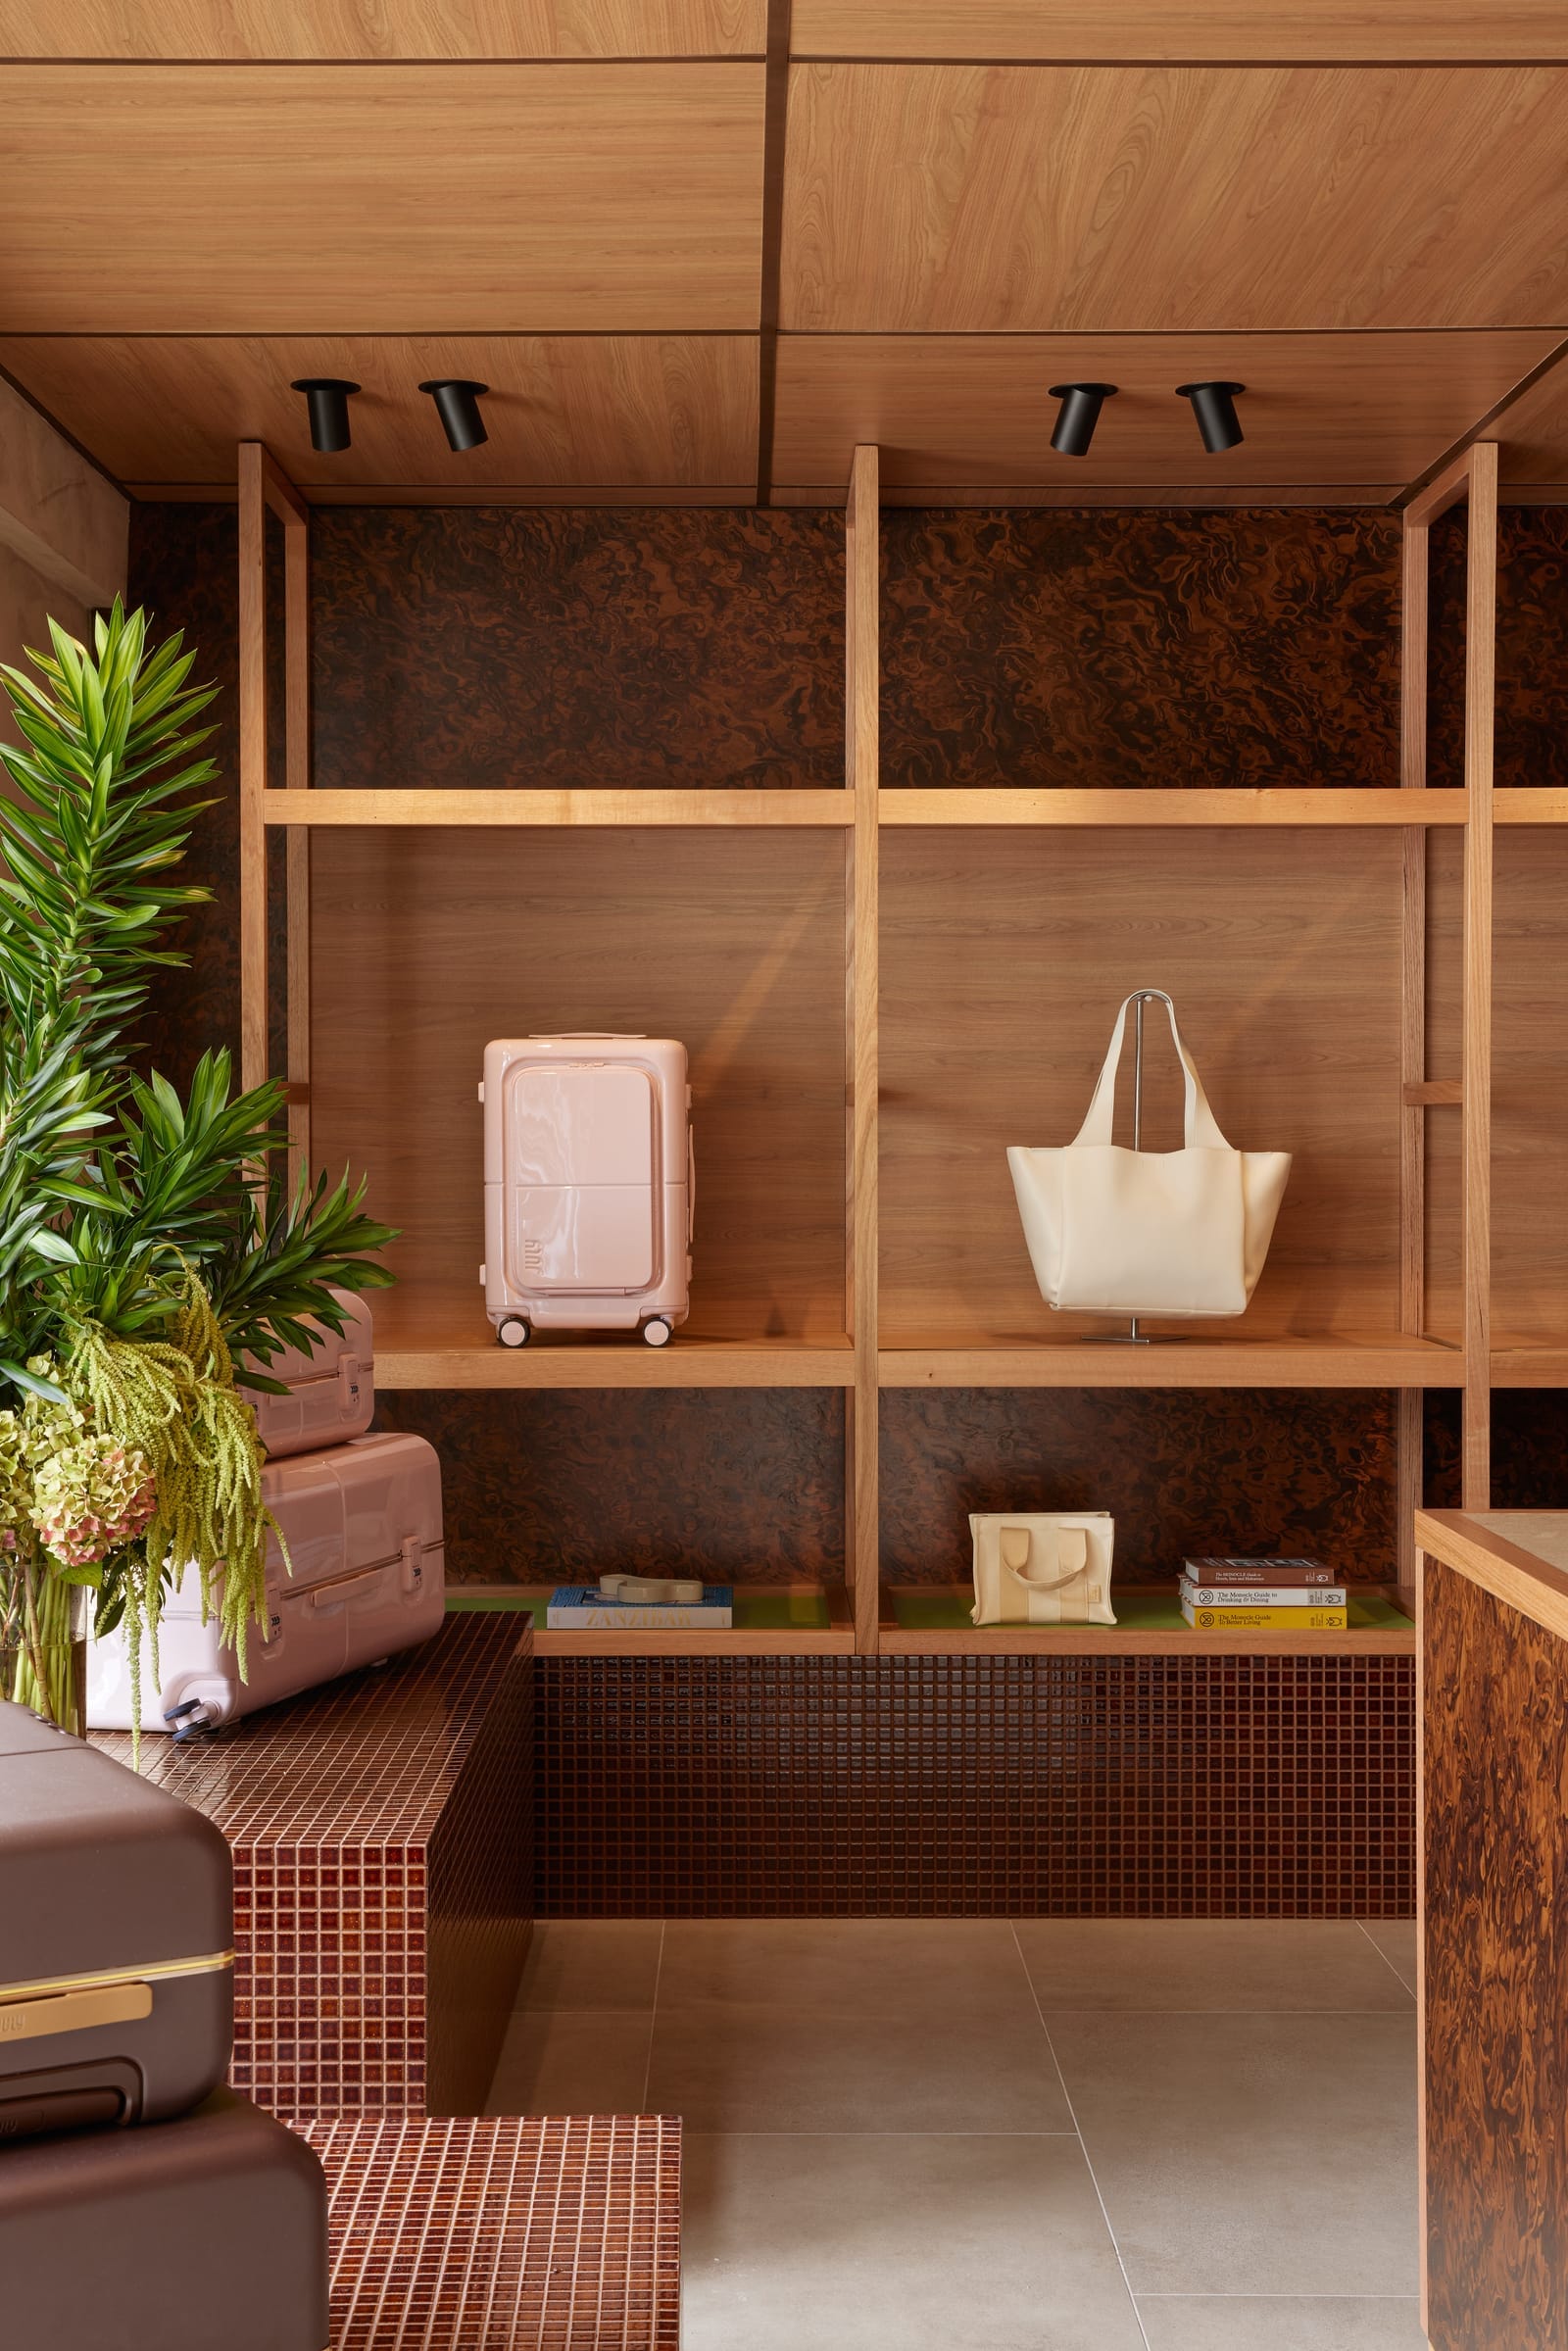 July Store by Acre. Photography by Cieran Murphy. Timber shelving unit. Maroon tiled walls and benches. Timber ceiling and grey tiled floor.  